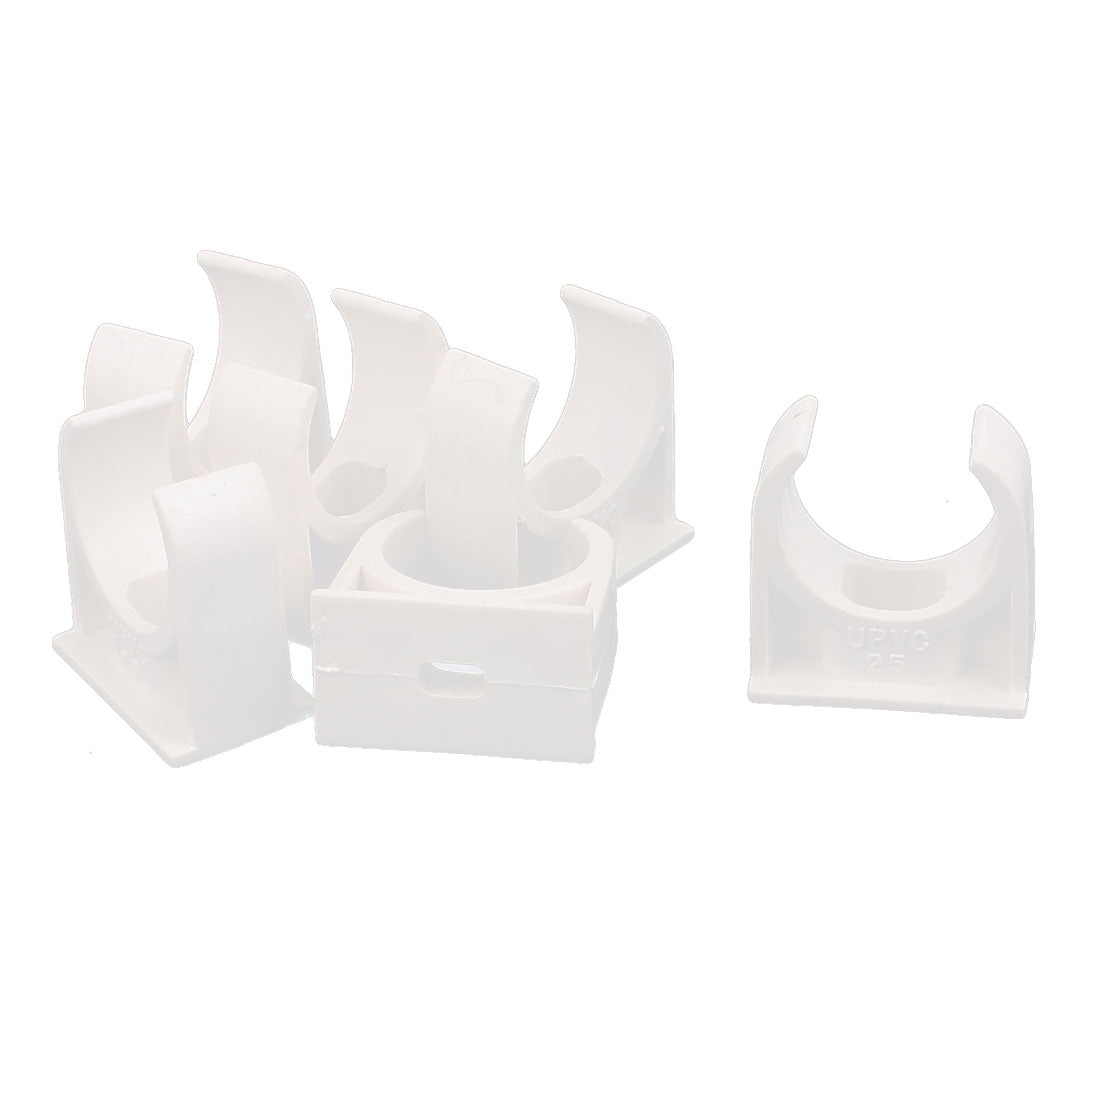 uxcell Uxcell 6 Pcs 23mm Diameter PVC Water Tube Pipe Clamps Clips Connectors White